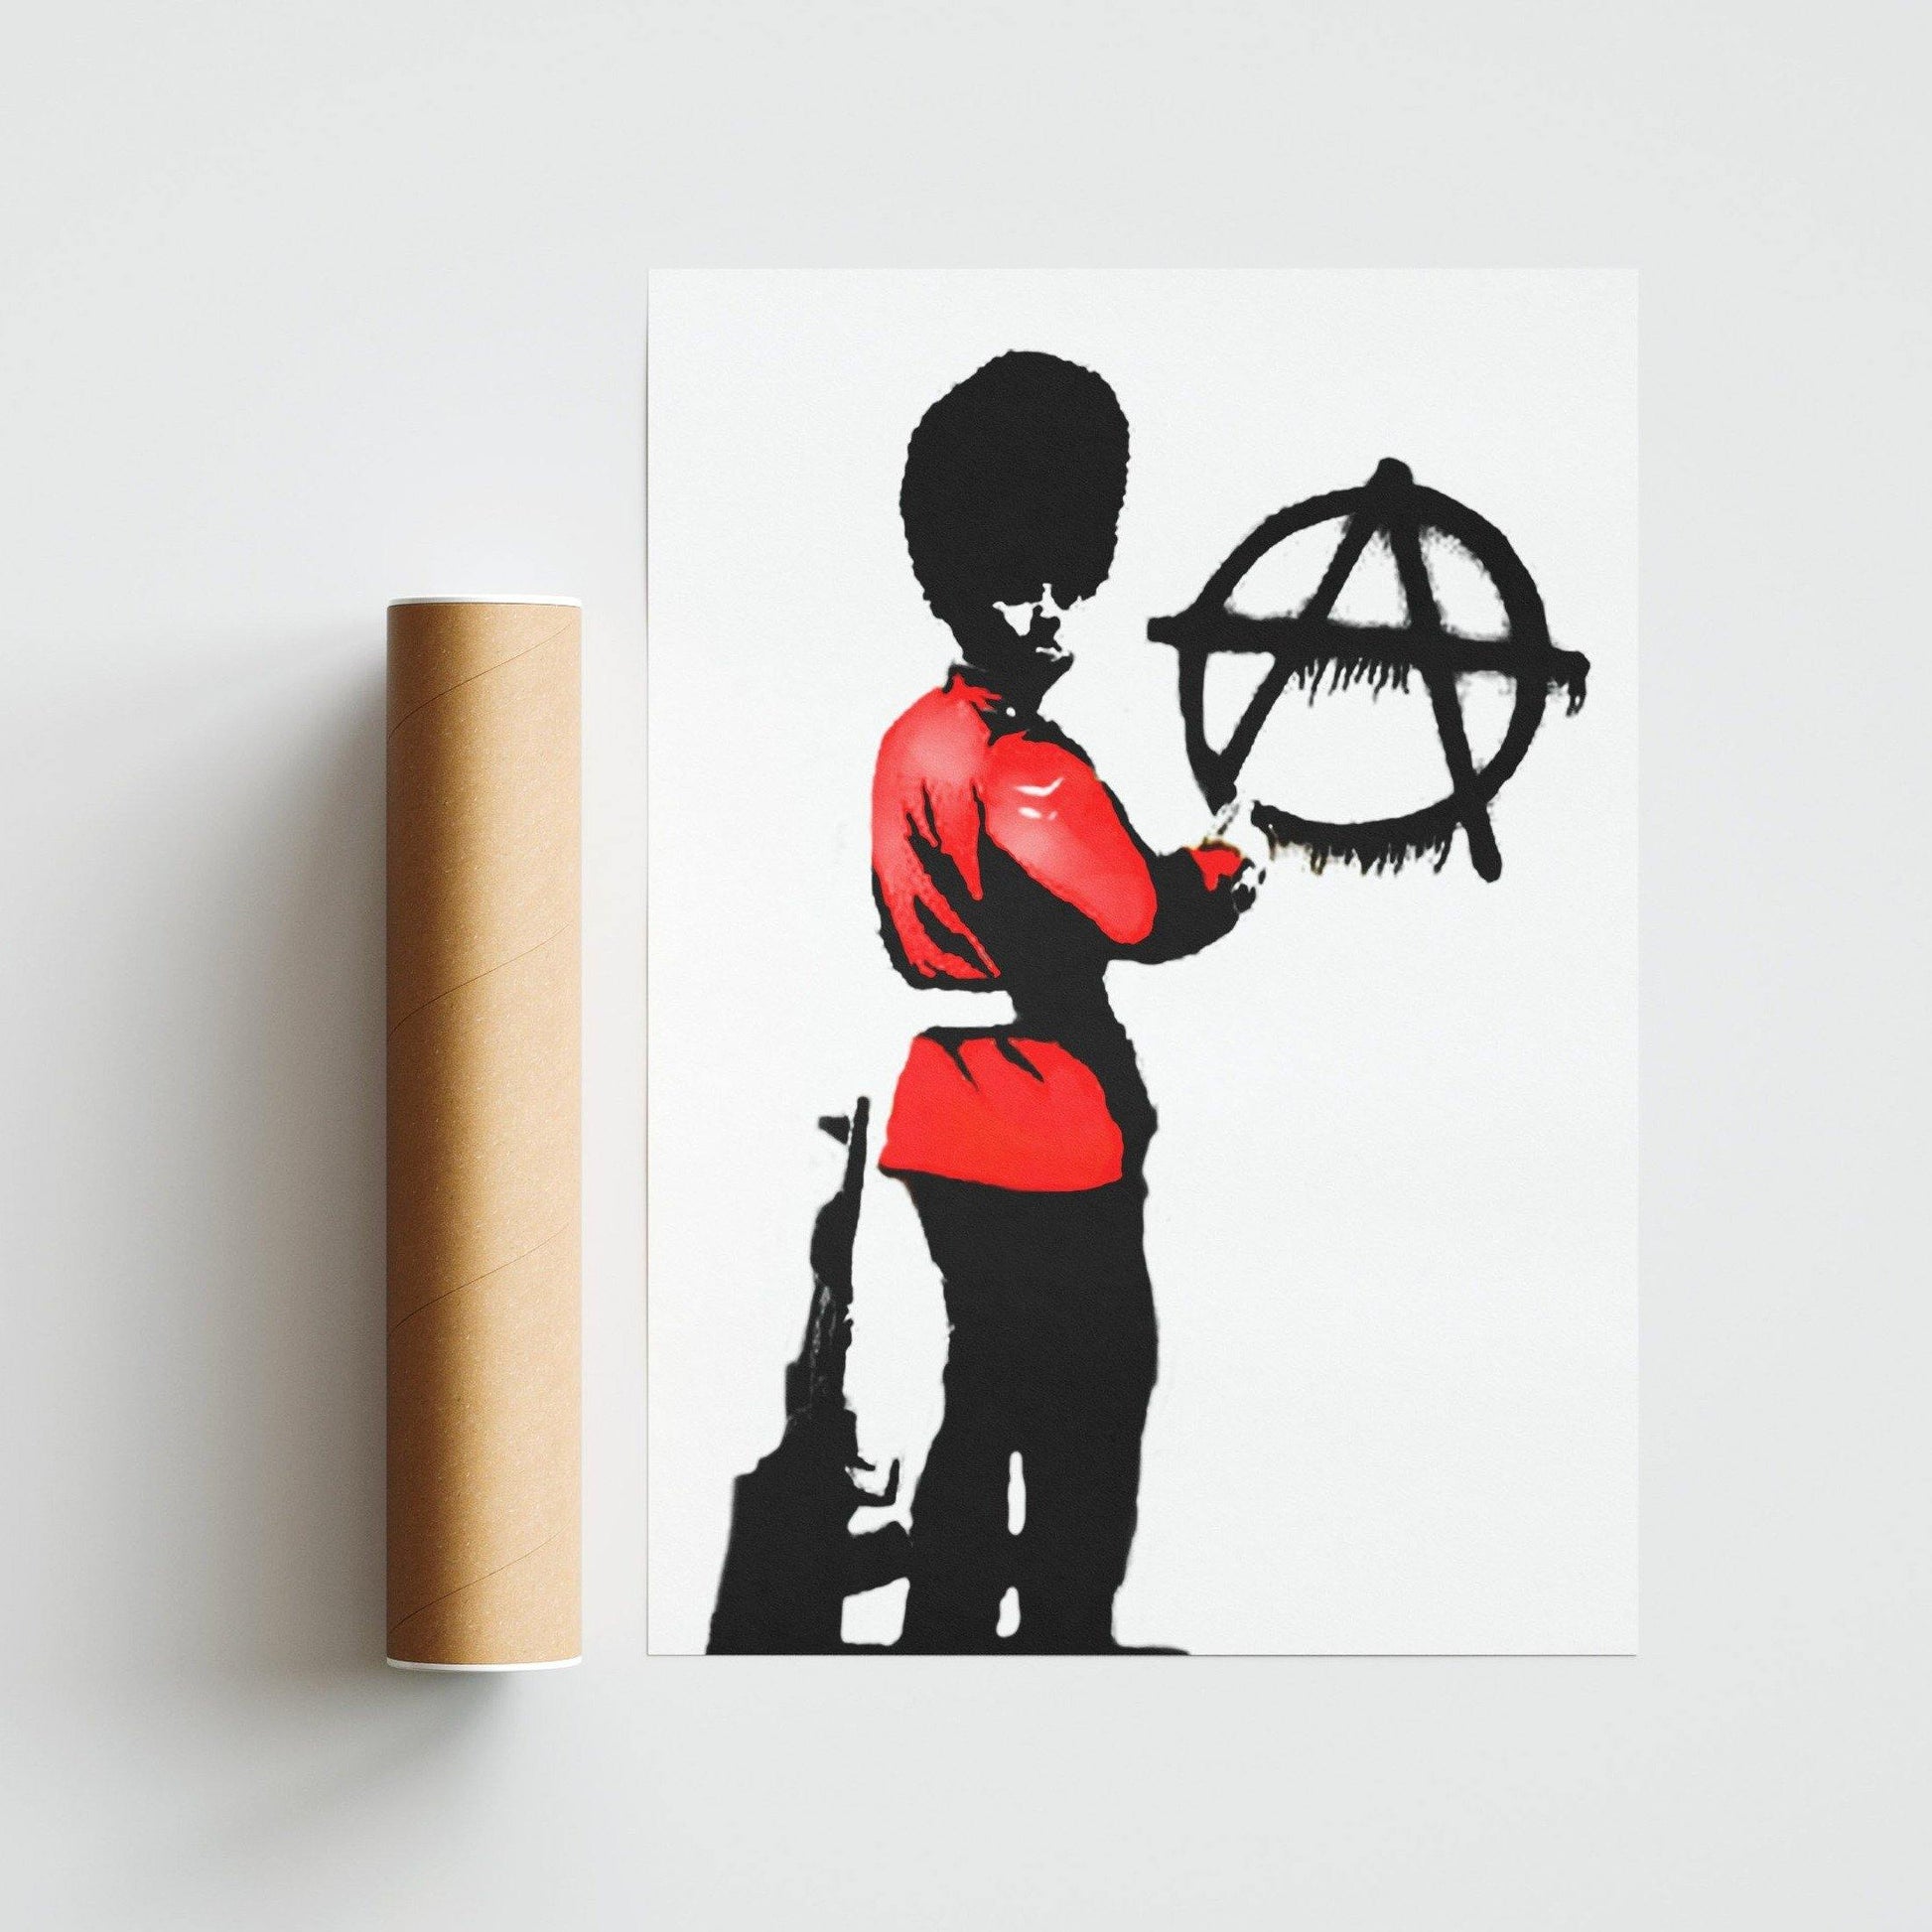 Add some edge to your décor with this Queens Guard Pissing Banksy Poster. This street art piece is sure to start some conversations. With a punch of color, this poster will liven up any space. Put it up in your home office or bedroom to add some personality to your space.- 98types